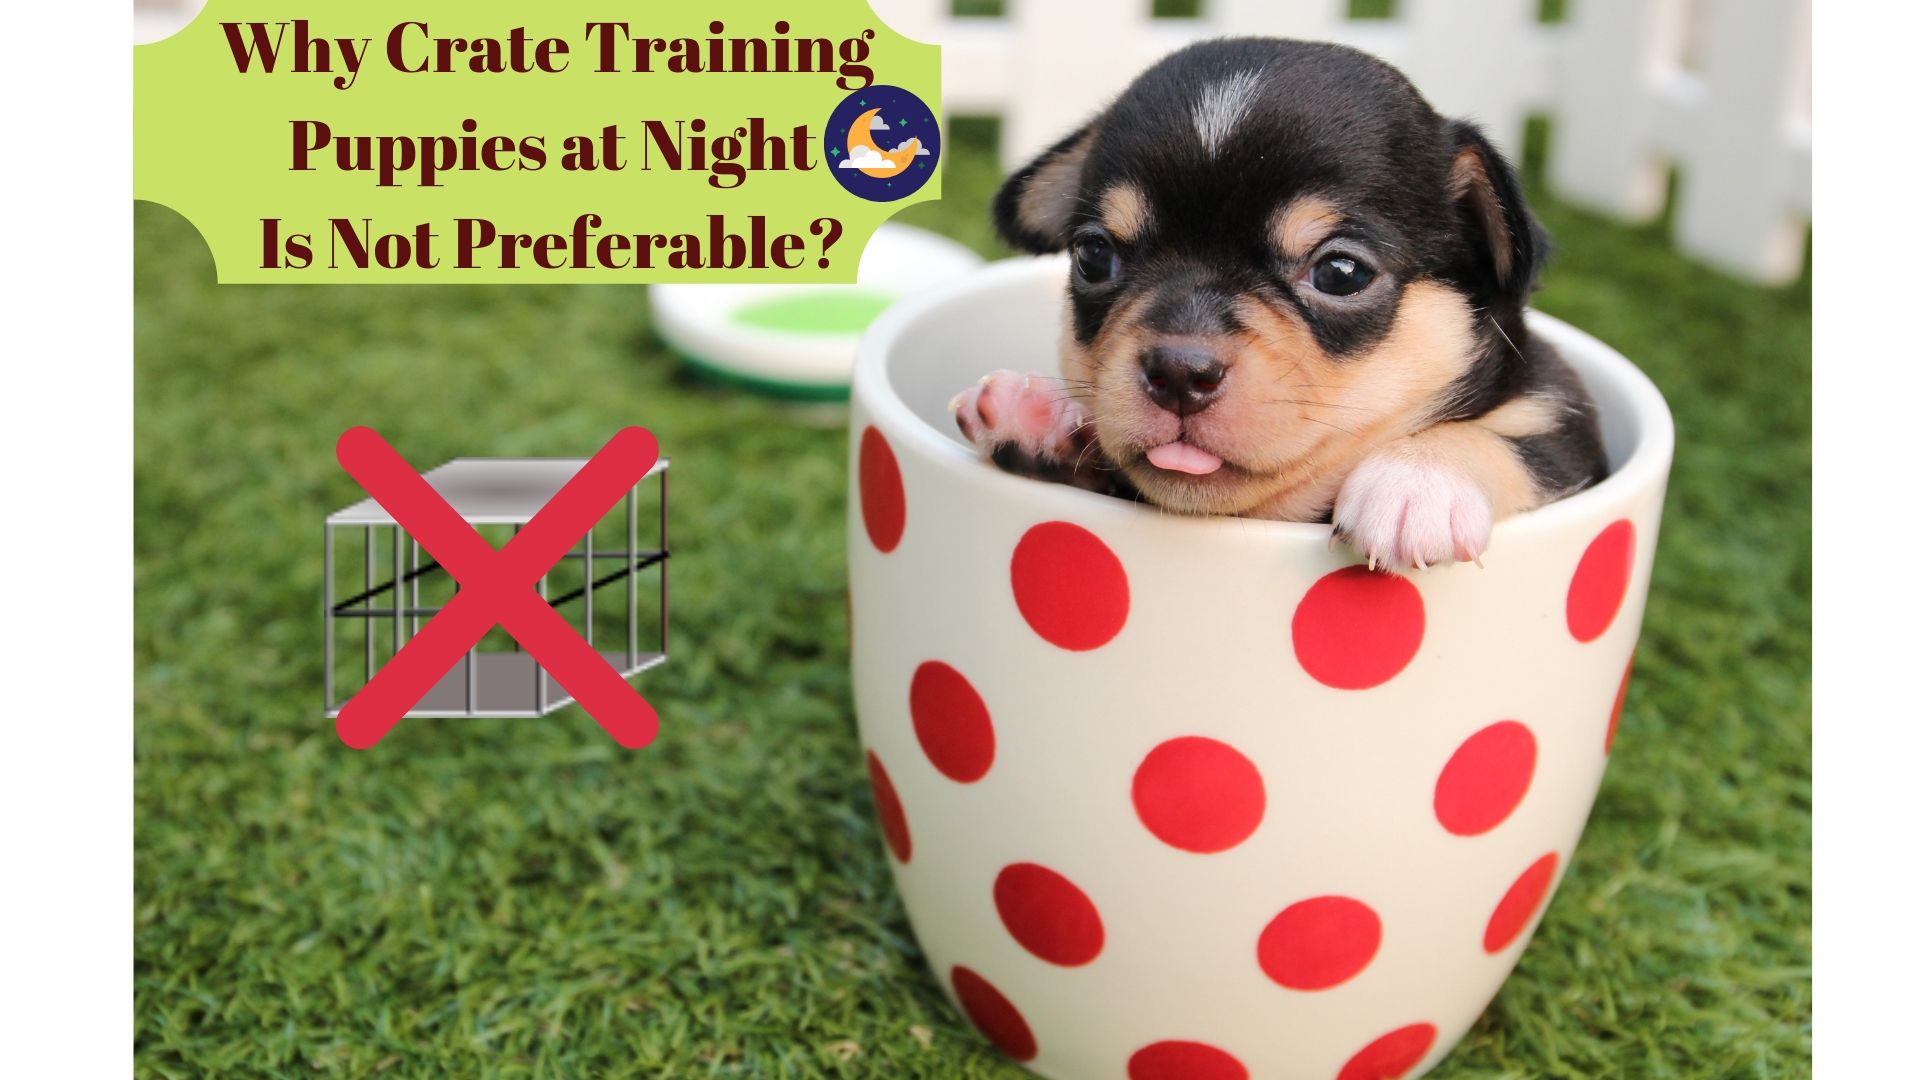 Why Crate Training Puppies at Night Is Not Preferable?